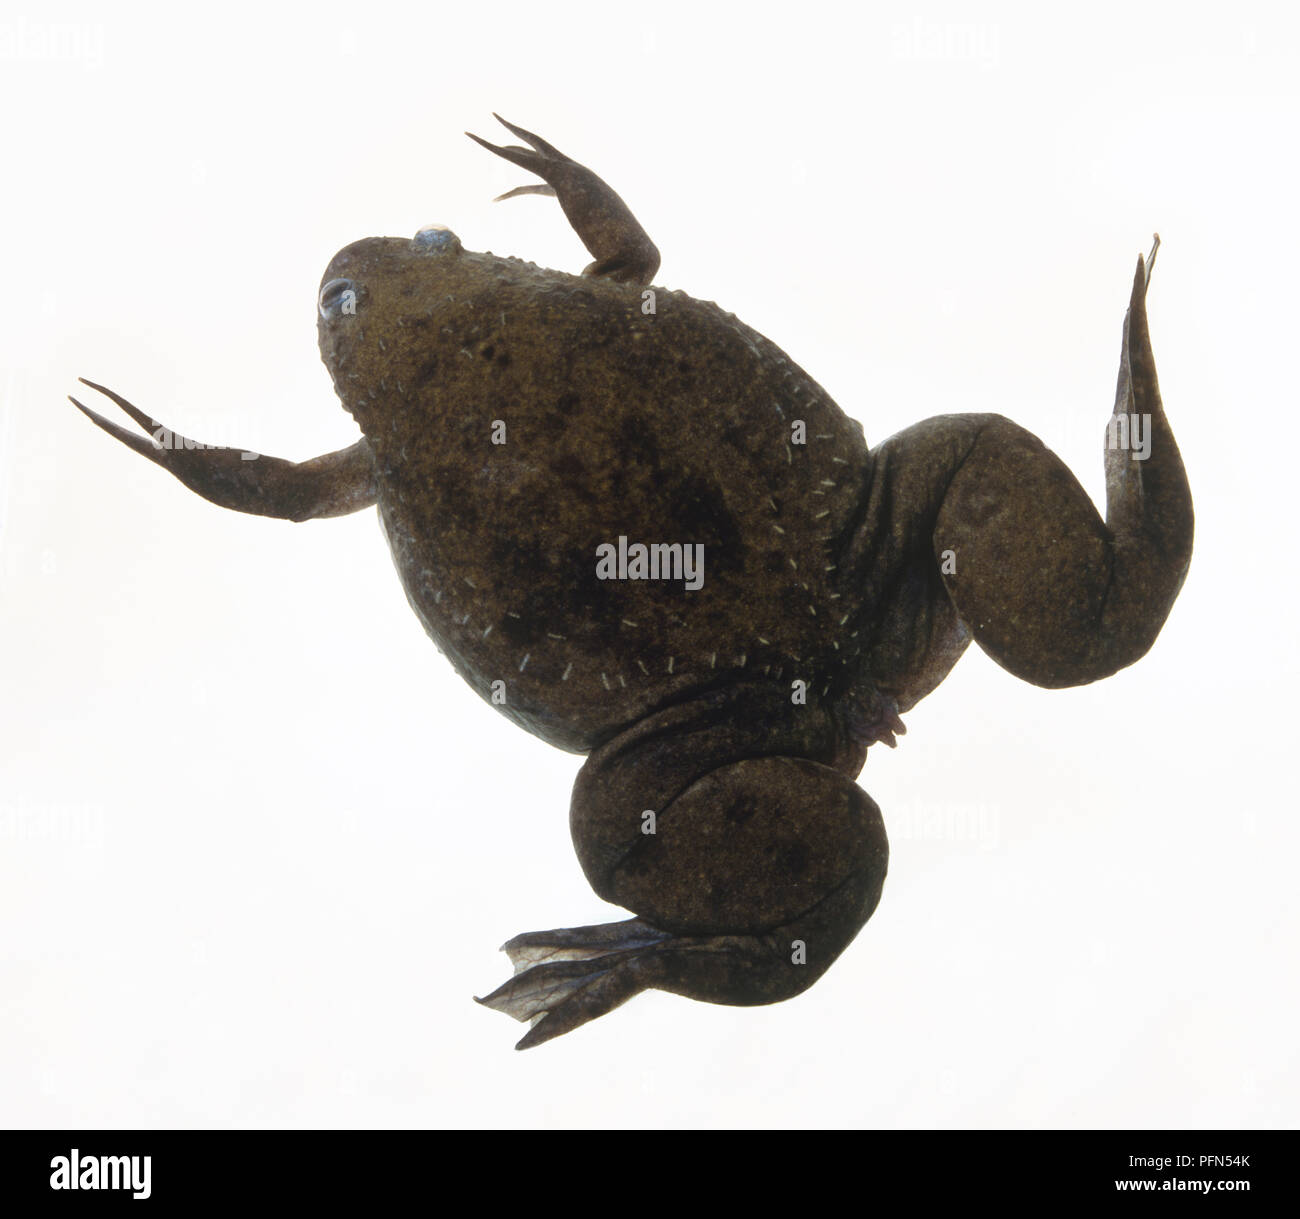 African clawed frog (Xenopus laevis), view from above Stock Photo